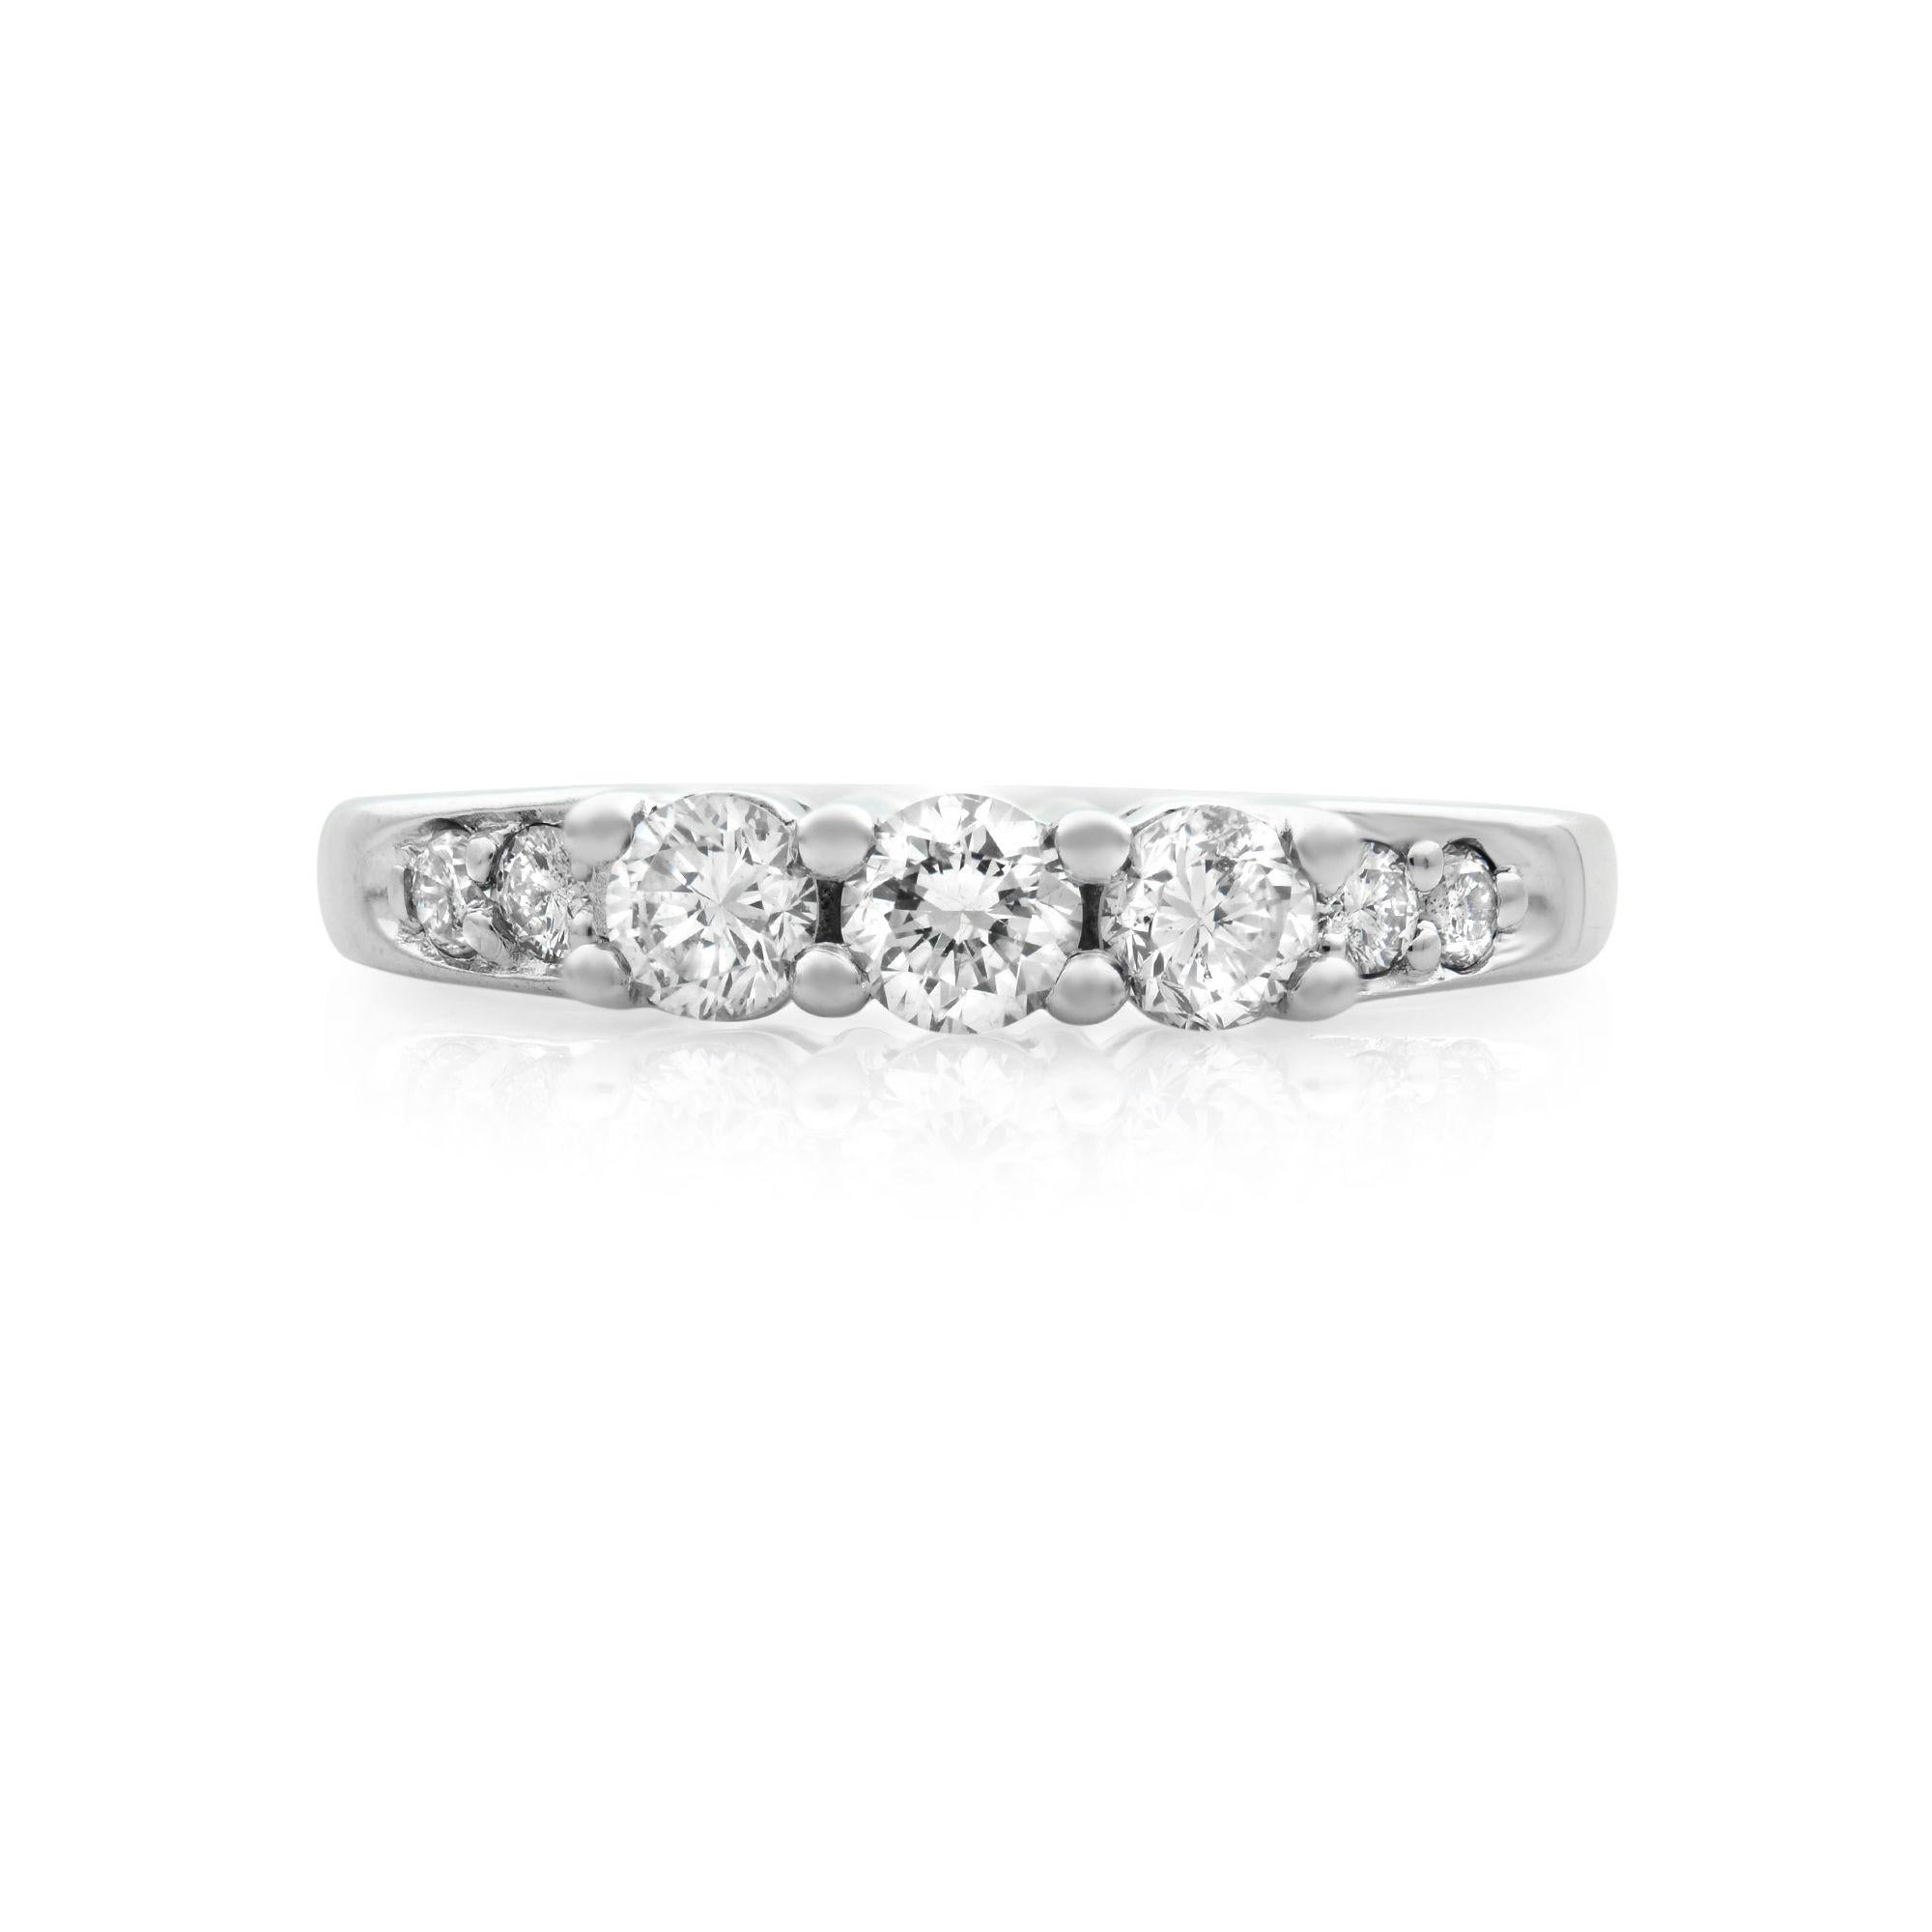 This classically beautiful design features three sparkling round cut diamond stones with additional prong set diamond accents to adorn the 14k white gold band. Total carat weight 0.55 carat. Diamond clarity SI1 and color G. The ring weighs 3.5 grams